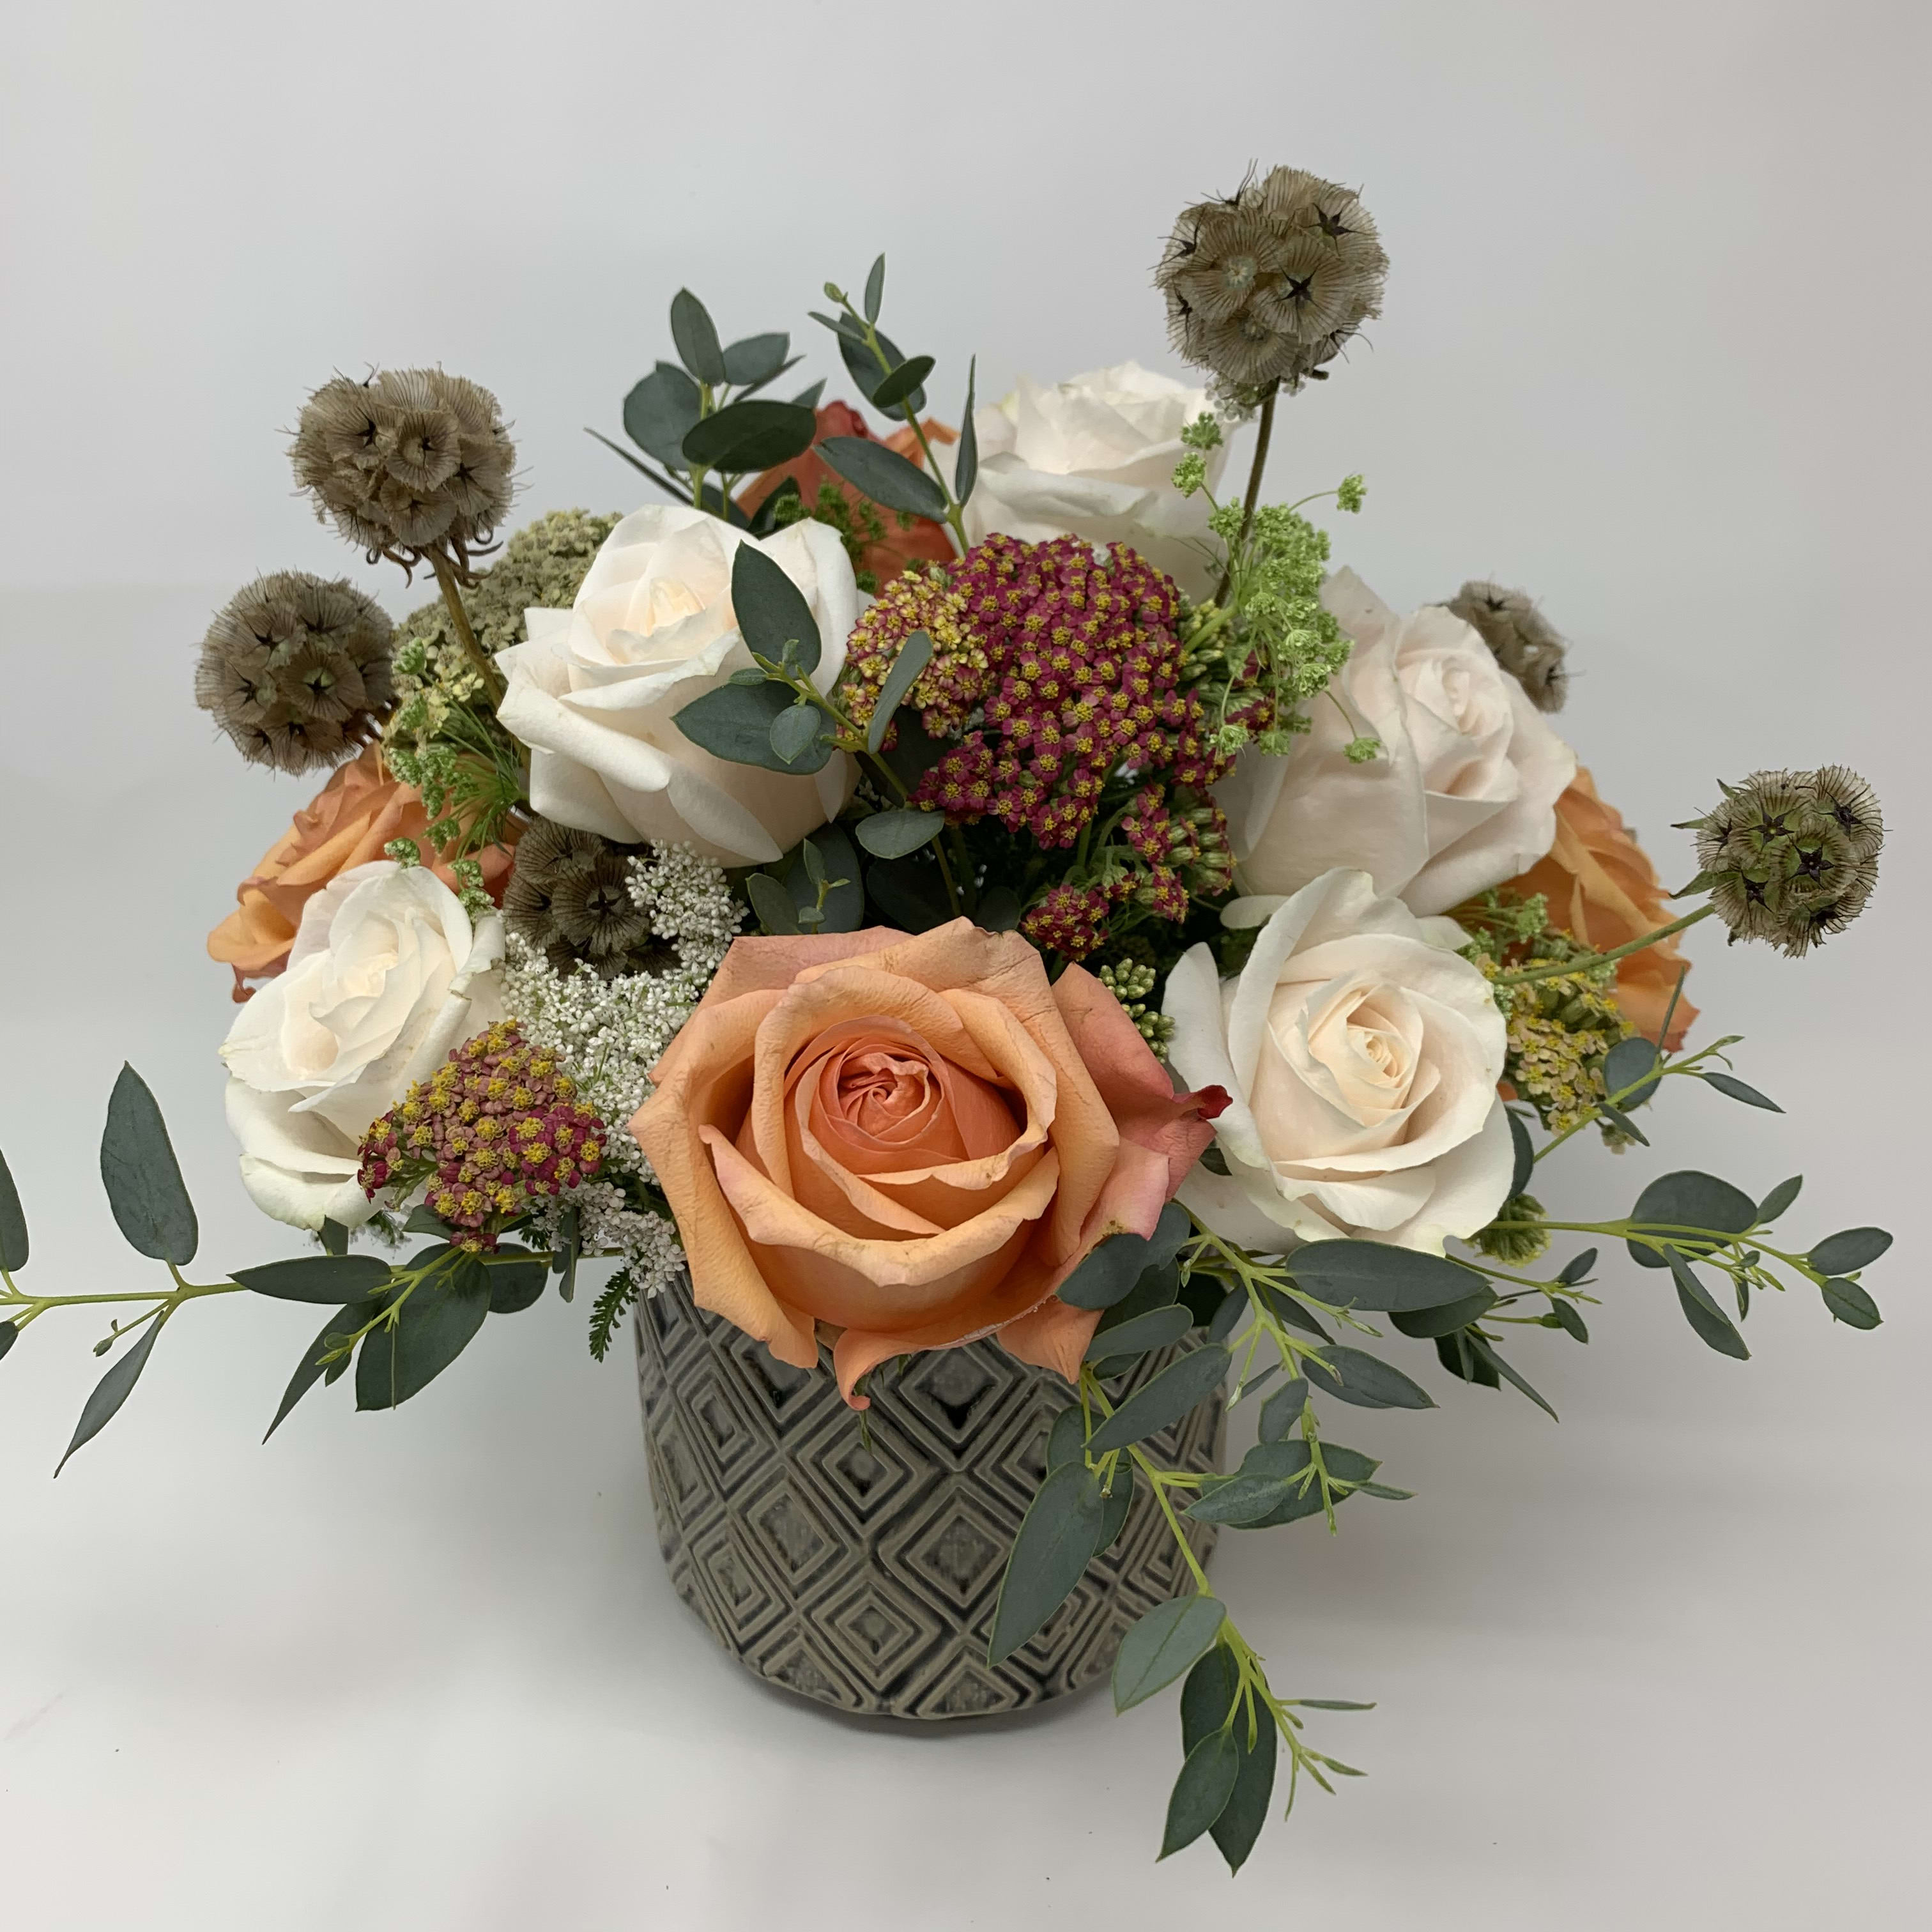 Neutral Meadow  - May contain white and peach roses with filler fitted into a vase.